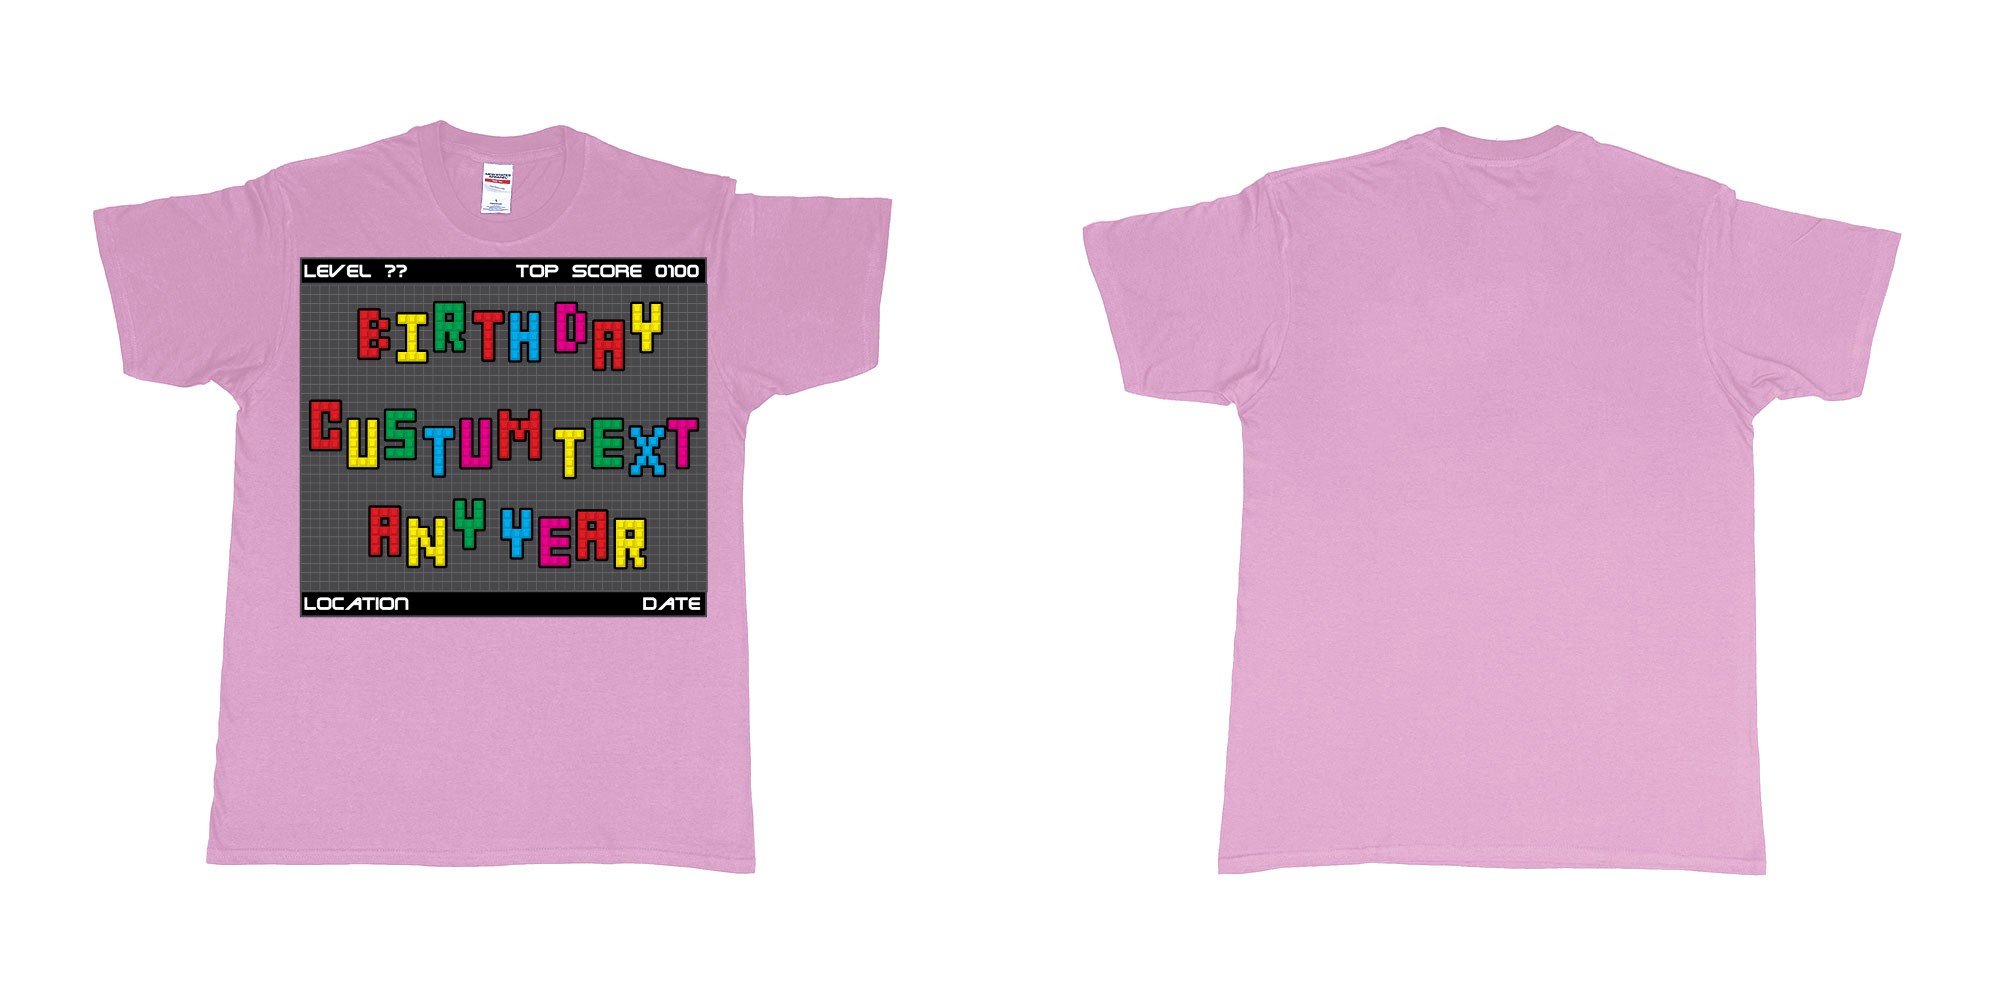 Custom tshirt design tetris block custom text birthday in fabric color light-pink choice your own text made in Bali by The Pirate Way